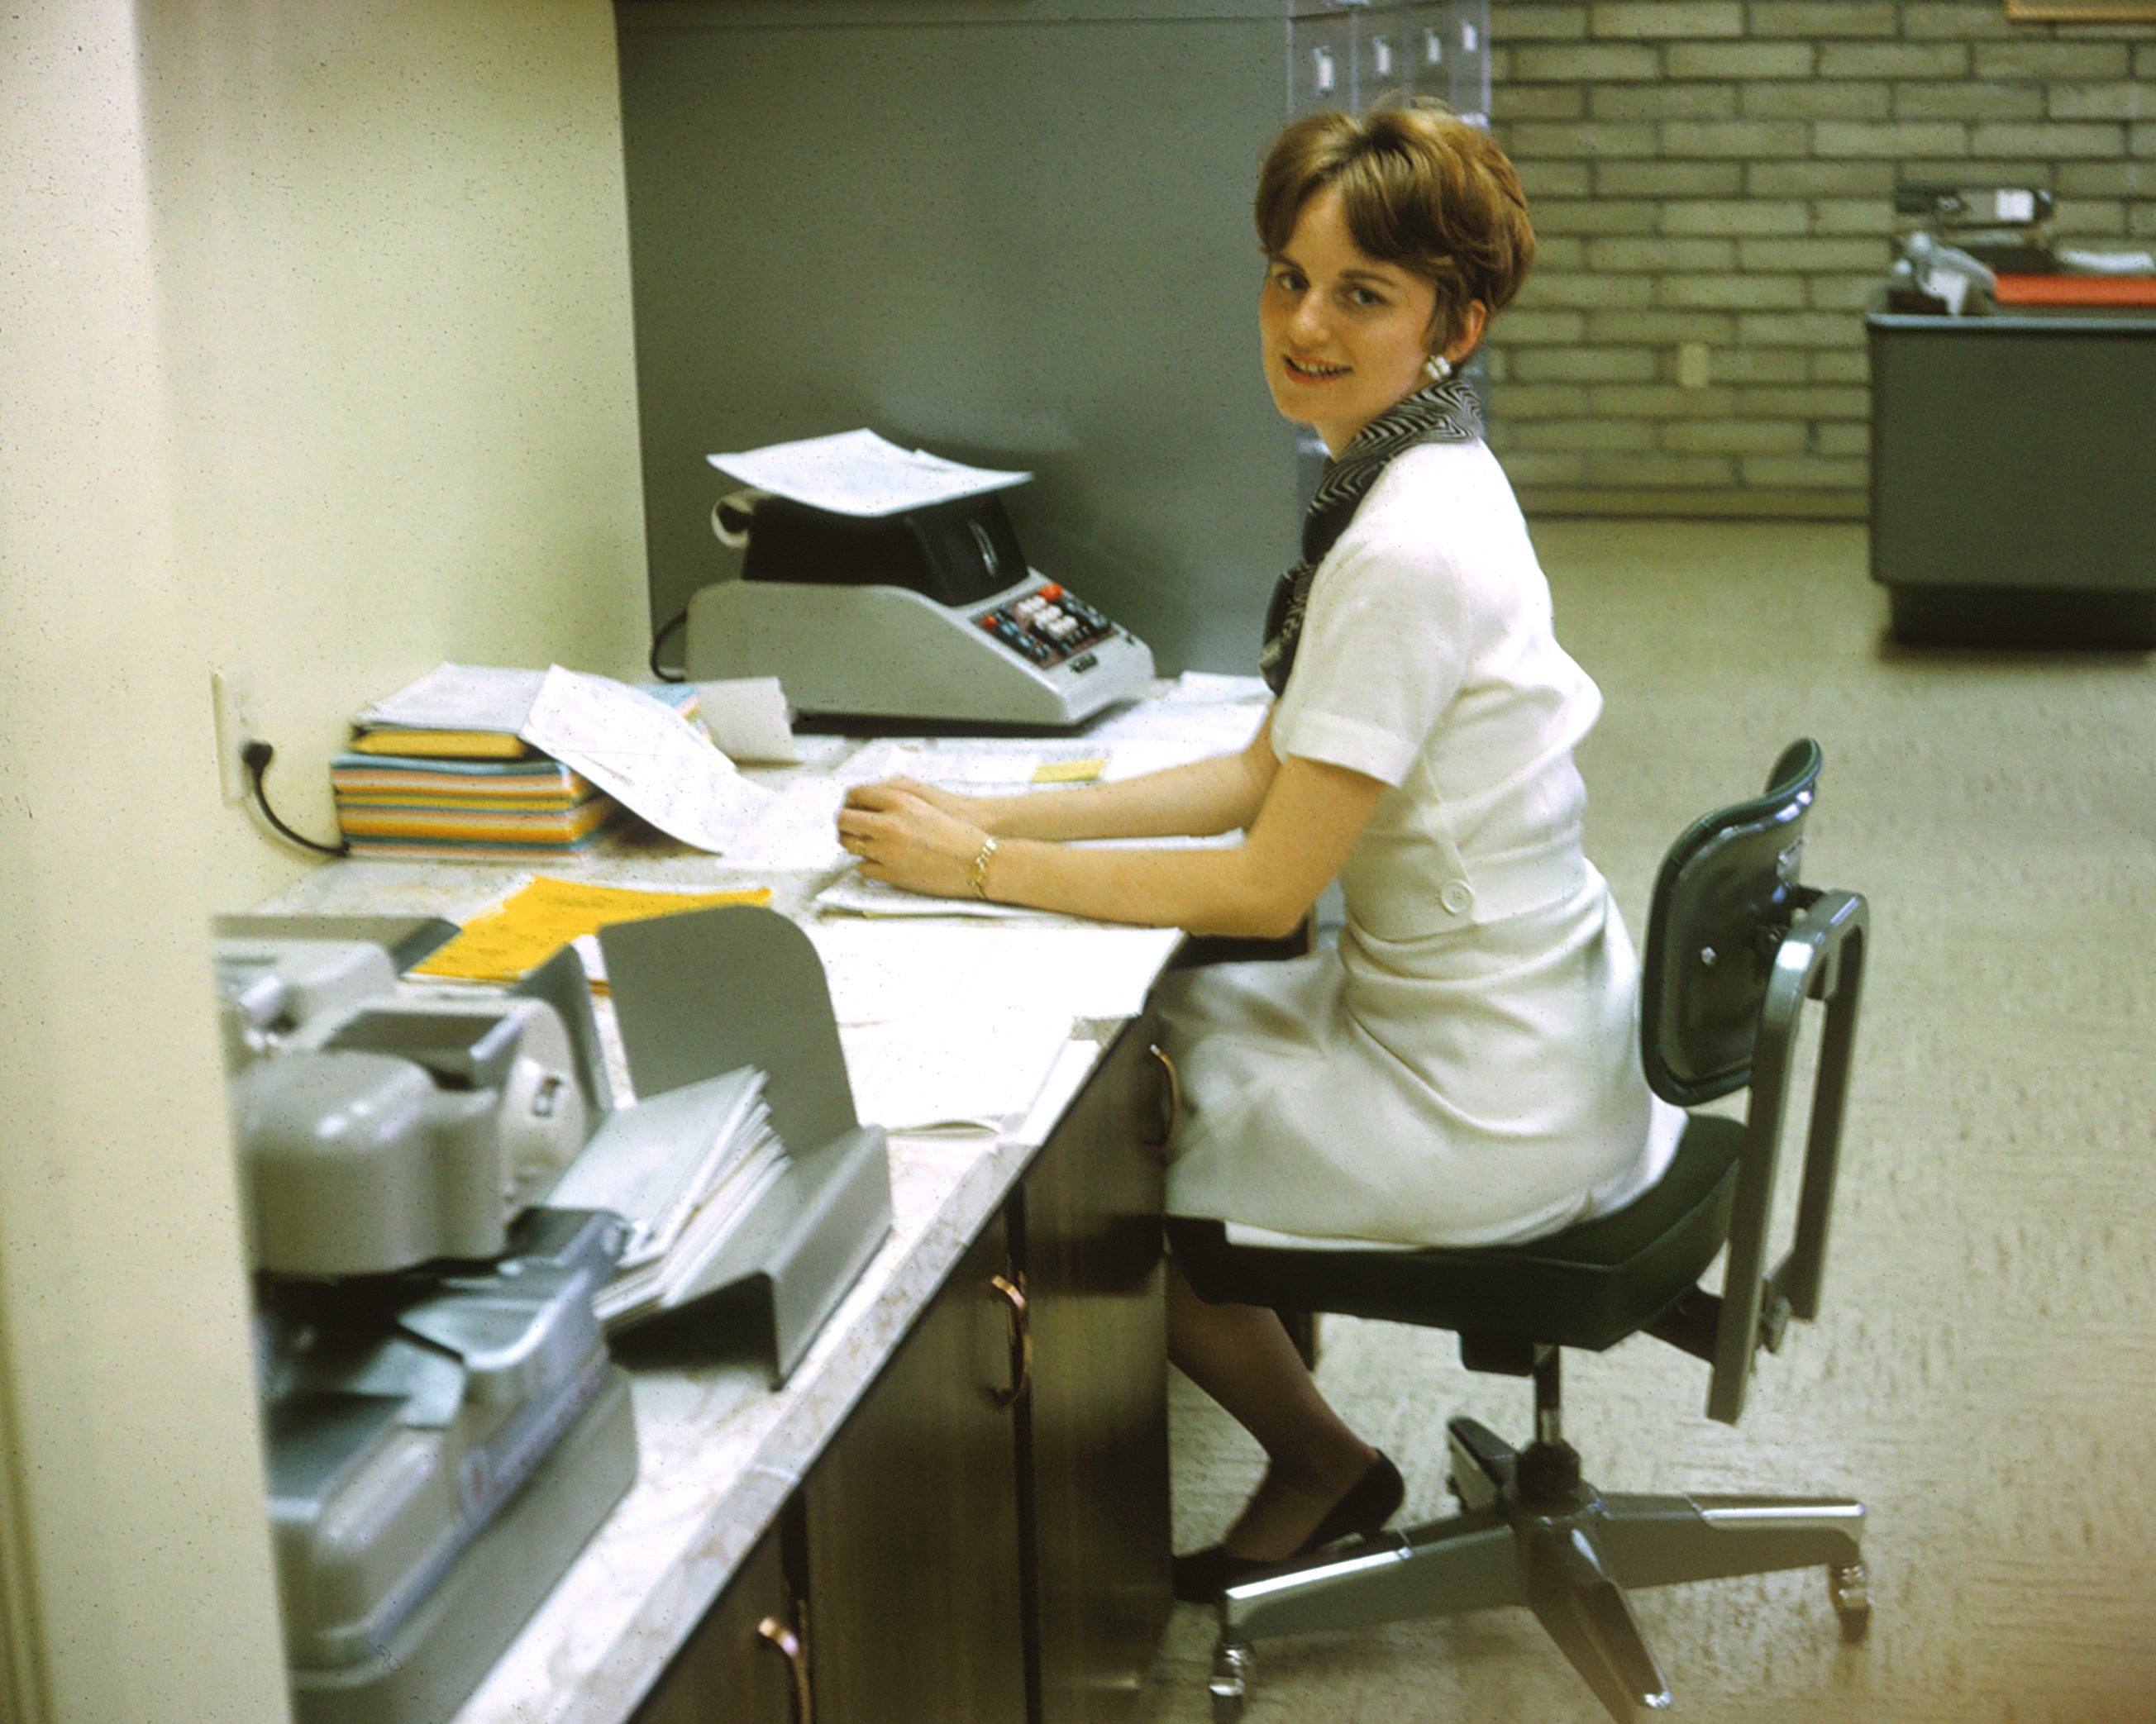 Woman sitting at a desk, working with papers, surrounded by office equipment of the past era